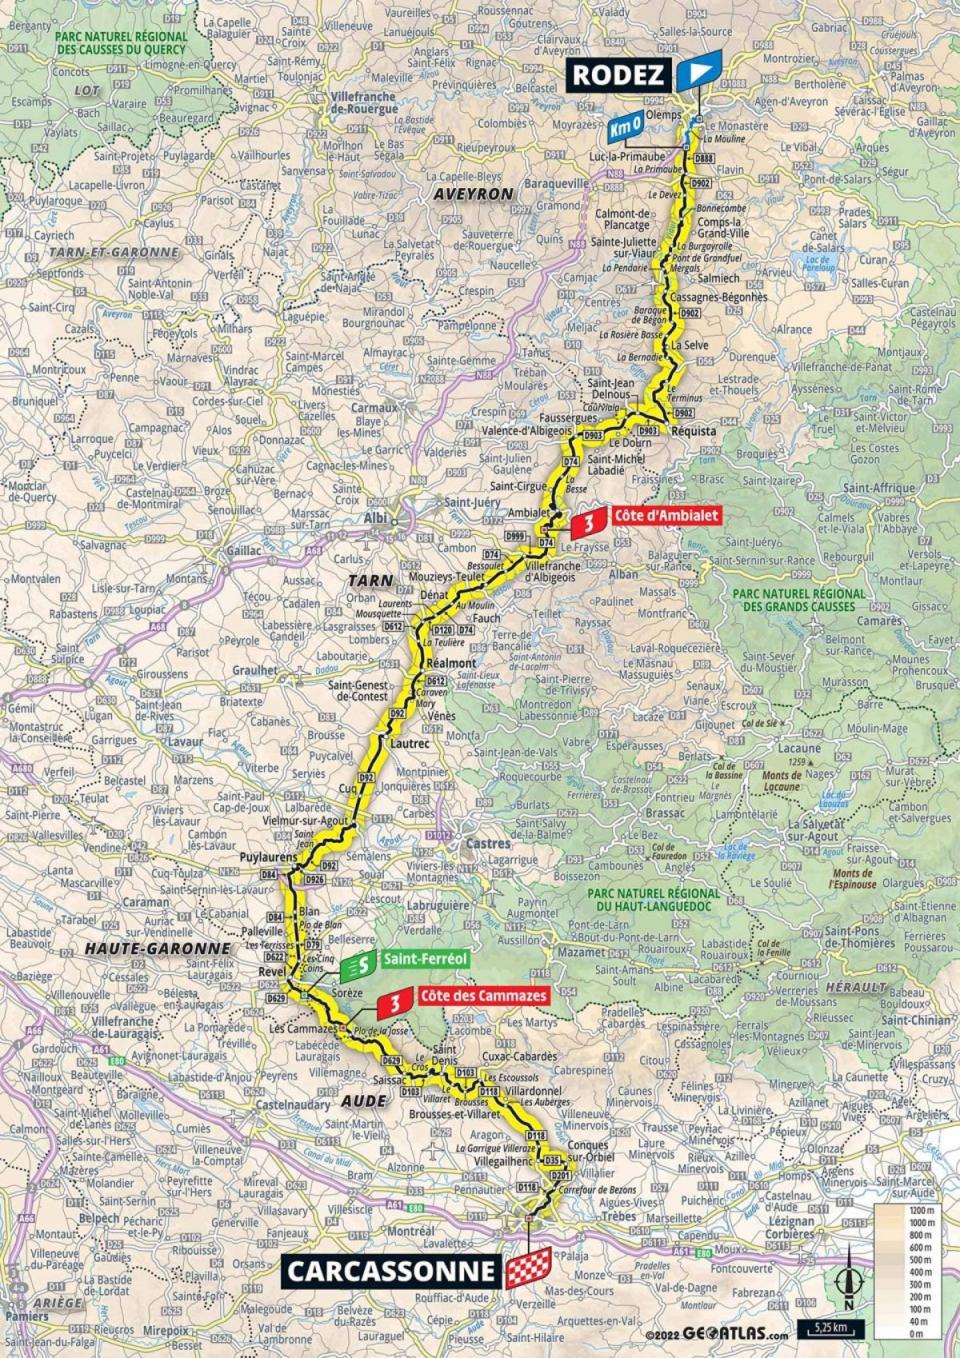 Map of stage 15 of the Tour de France (letour)